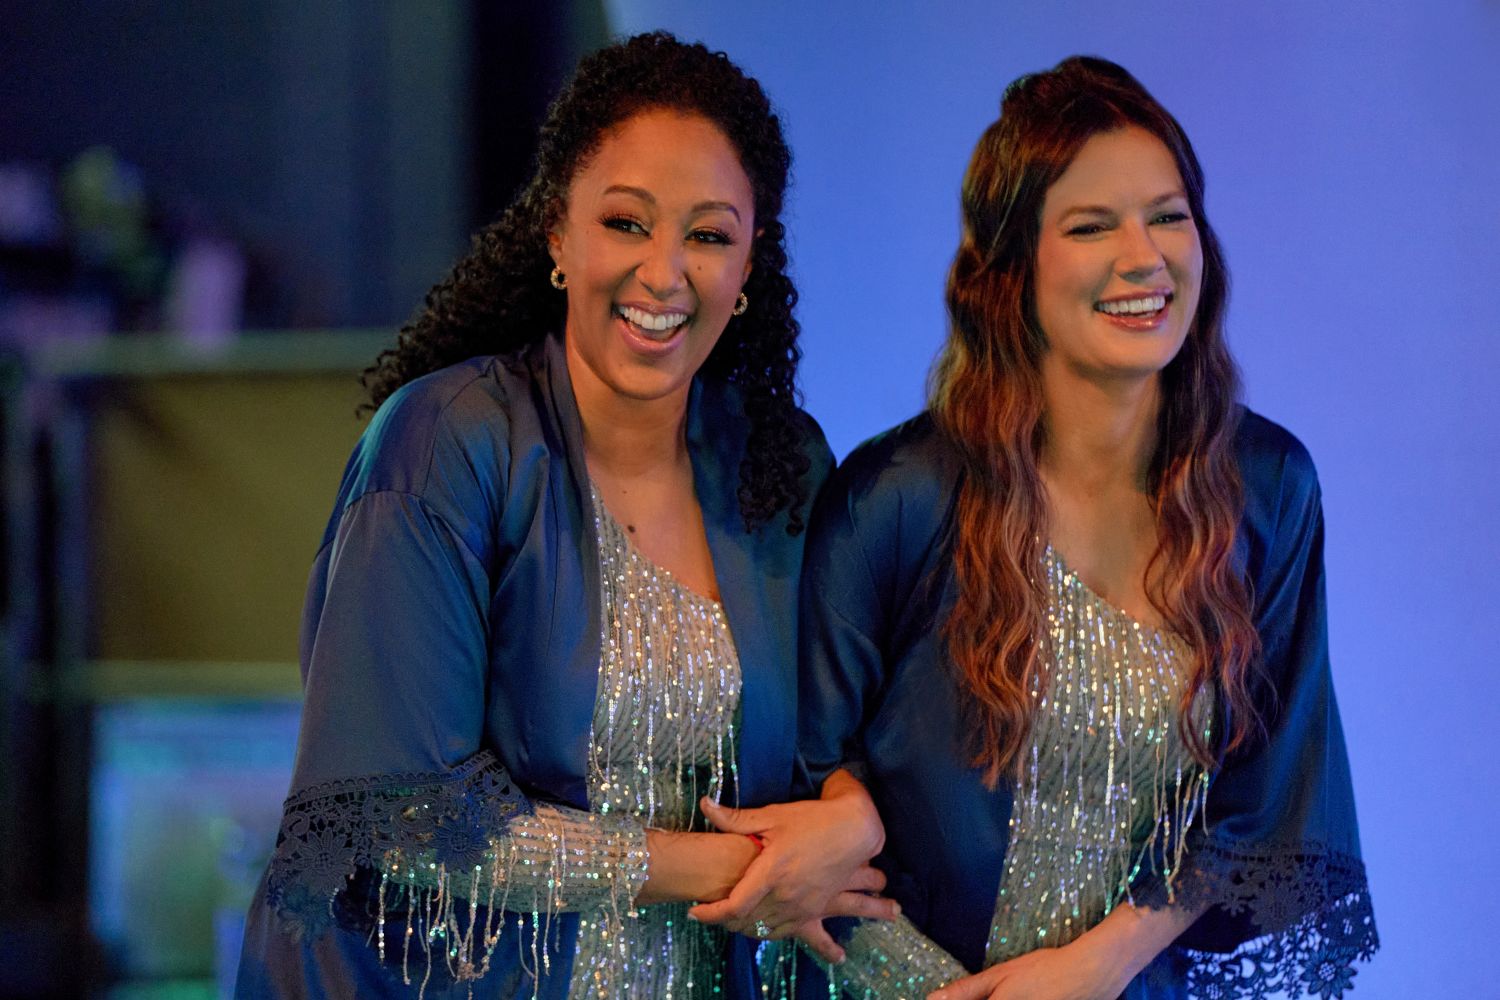 Tamera Mowry-Housley and Chelsea Hobbs in Dream Moms on Hallmark Channel